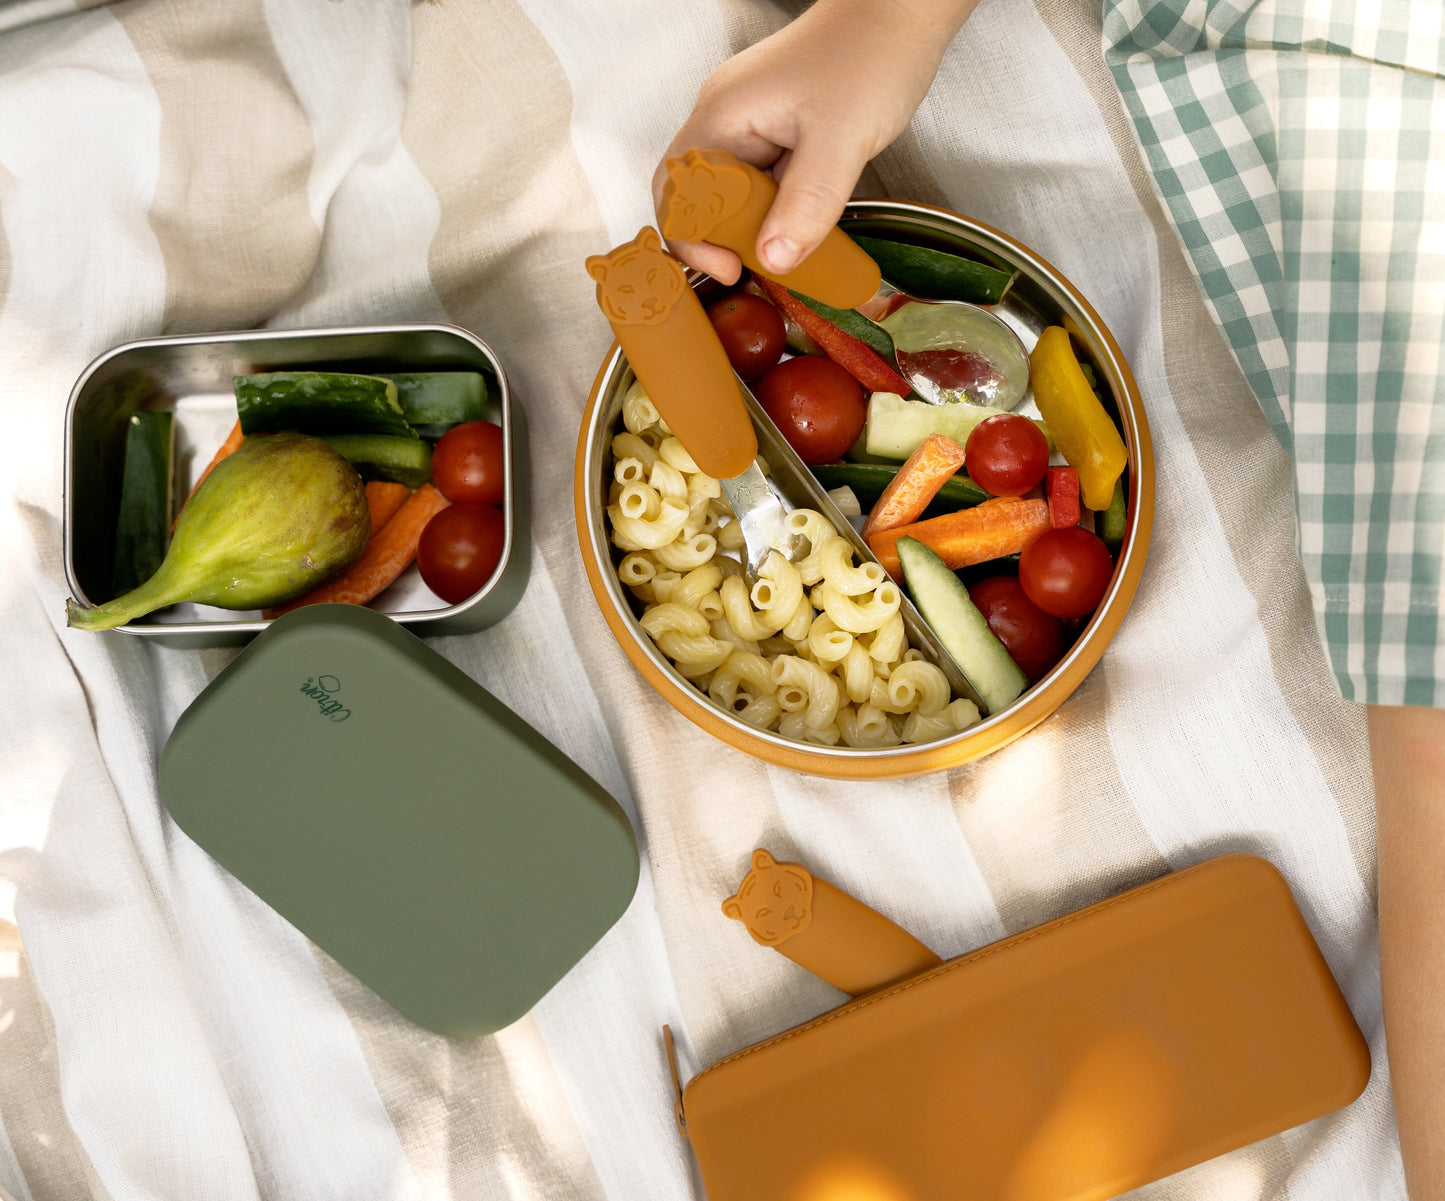 Mini Stainless Steel snack box - Green